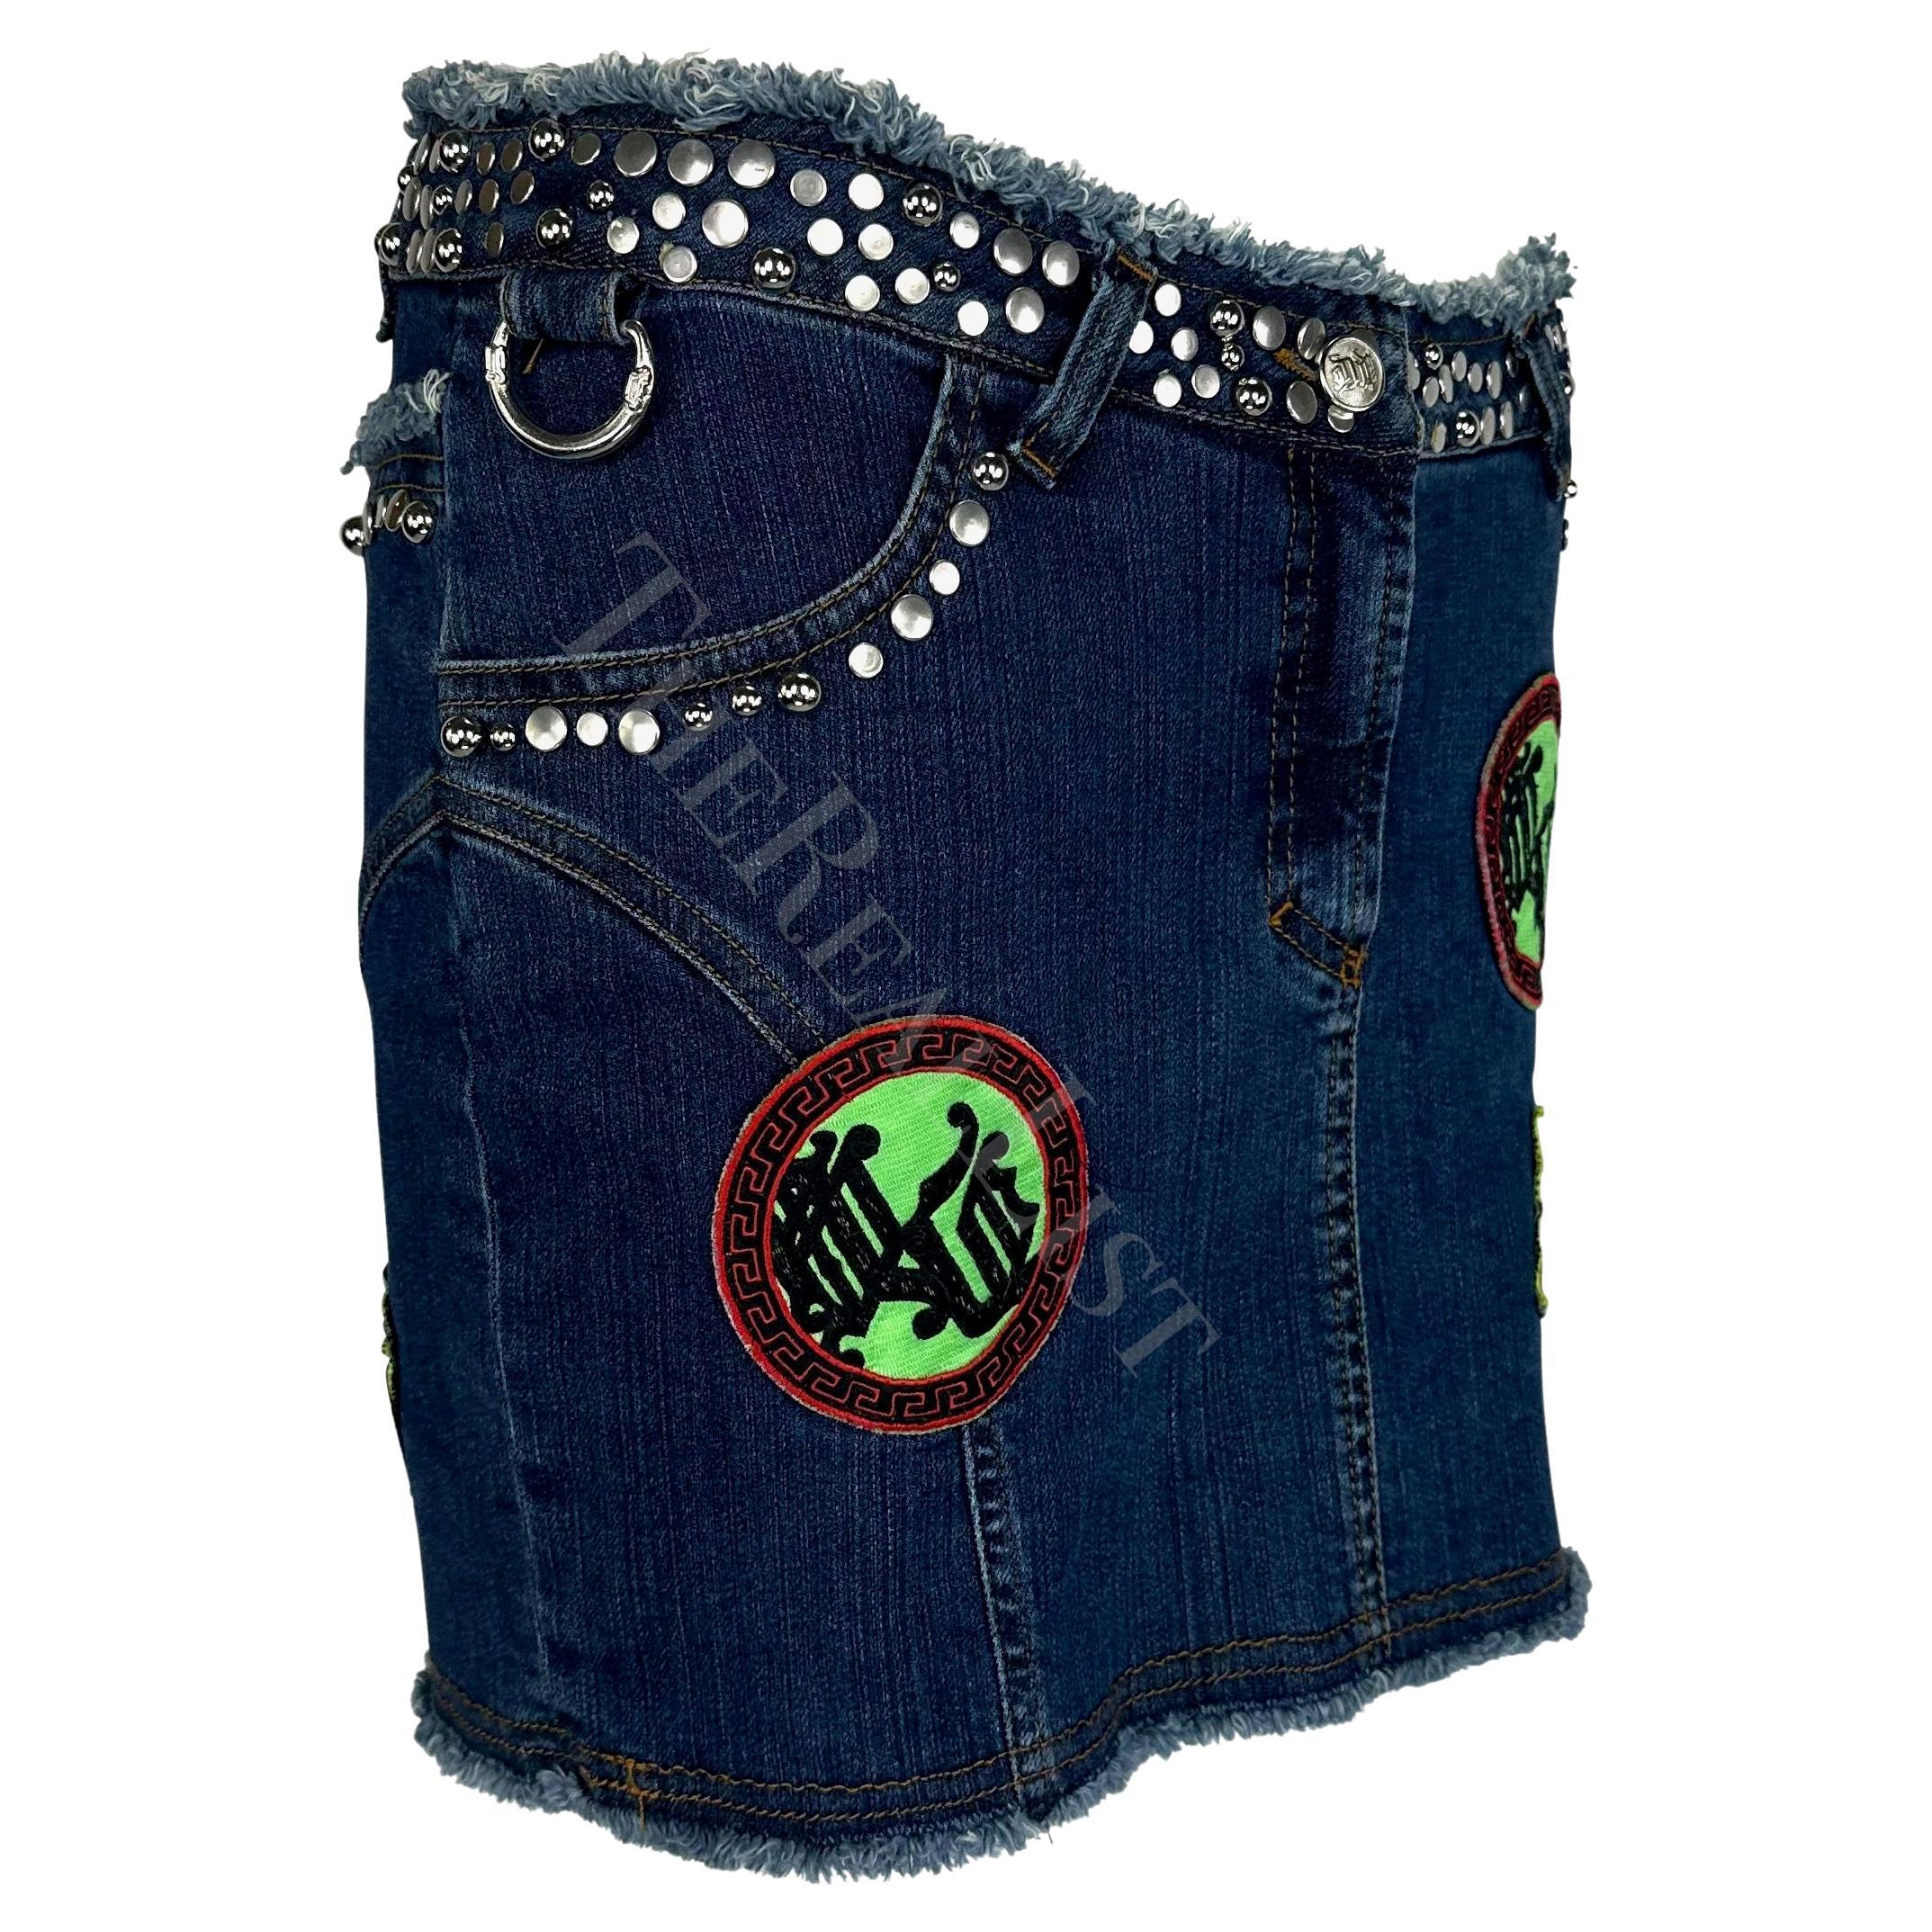 S/S 2005 Versace by Donatella Chaos Couture Studded Denim Patch Vest Skirt Set For Sale 11